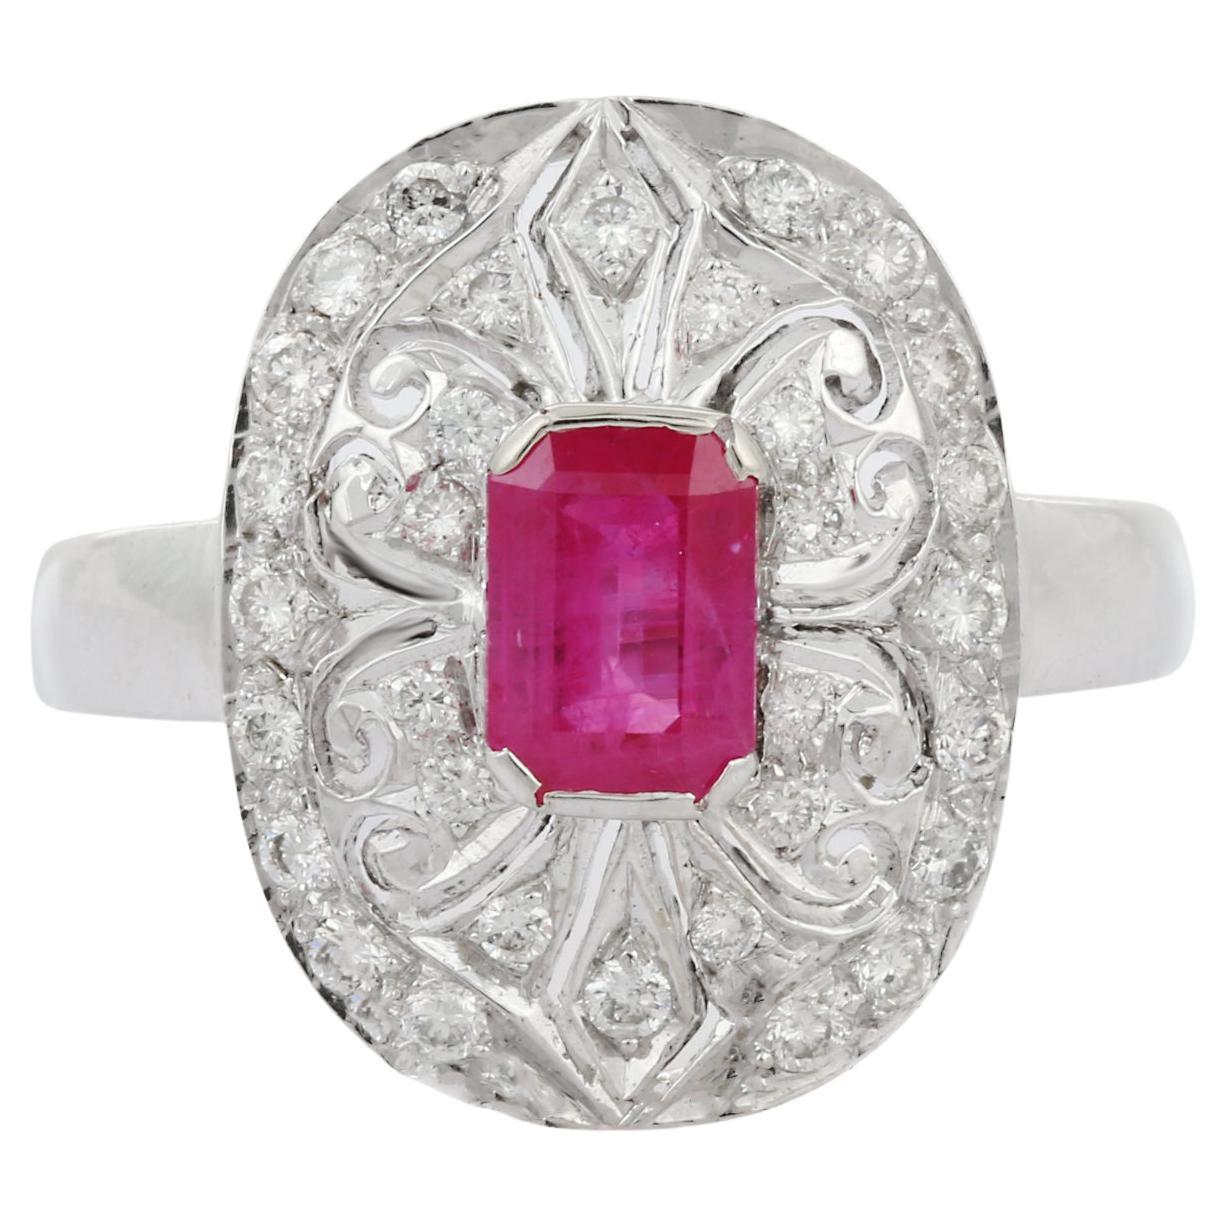 Clustered Diamond Cocktail Ring with 2.31 Carat Ruby in 18K White Gold Engraving